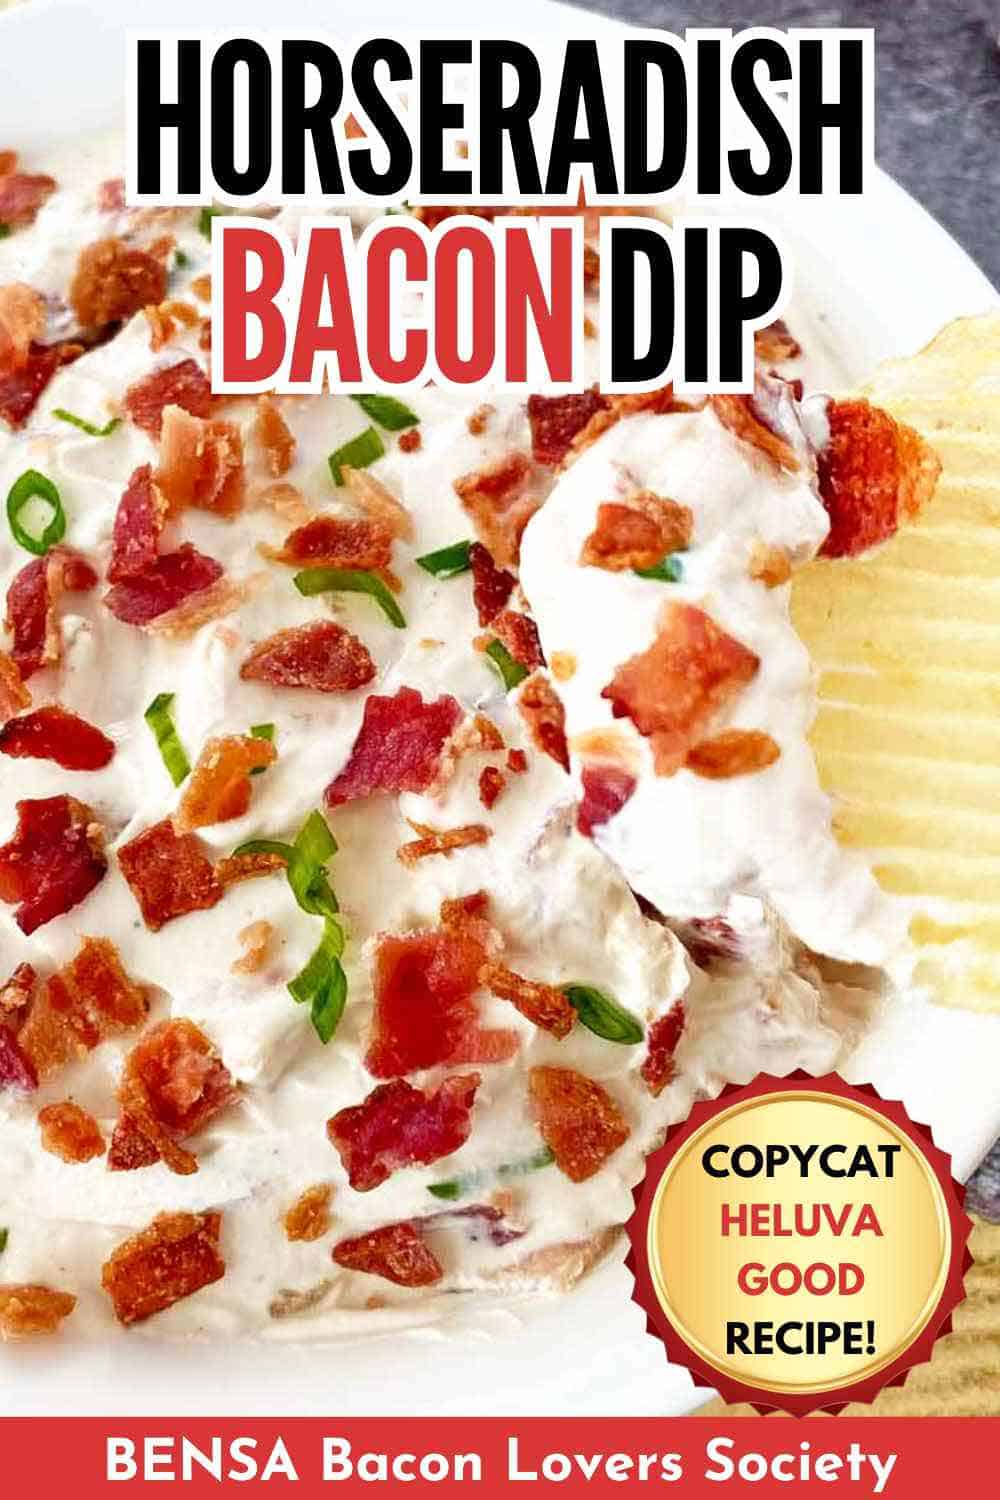 A potato chip being dipped into bacon horseradish dip.